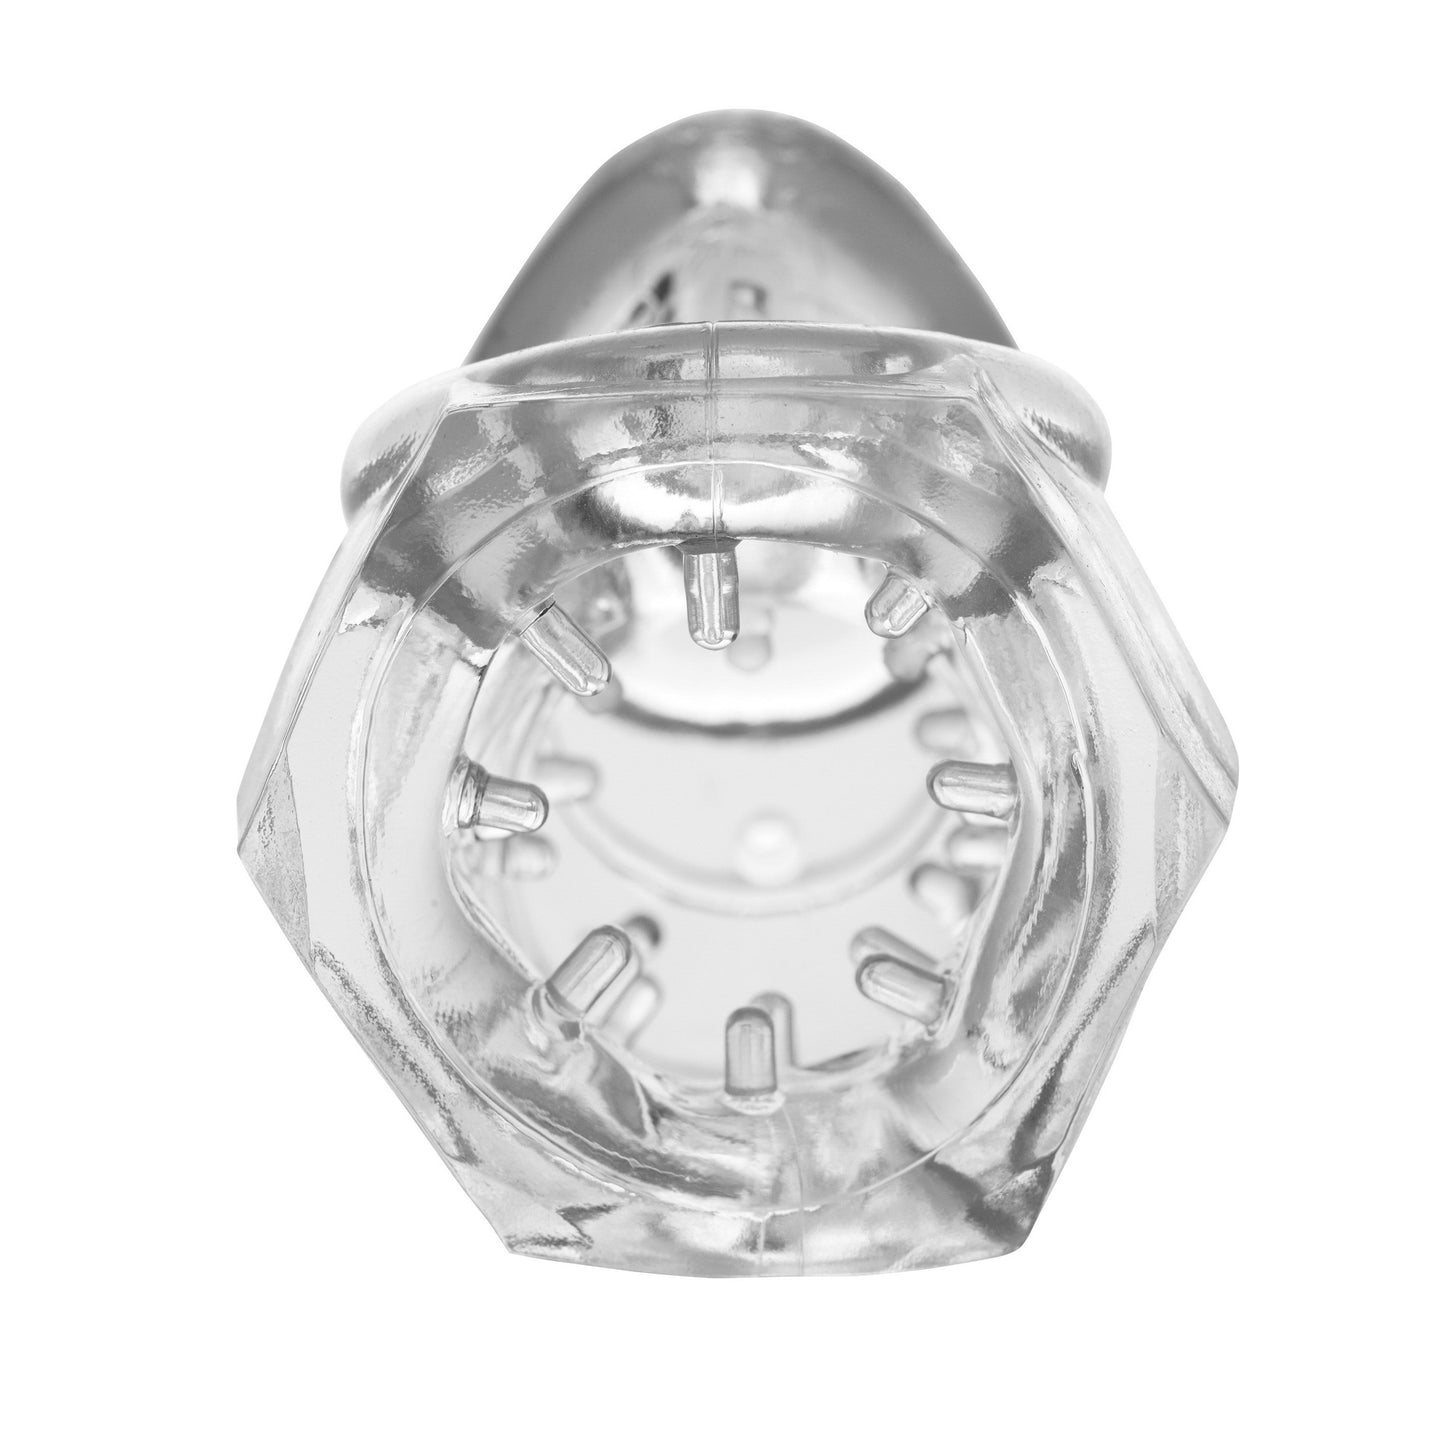 Detained 2.0 Restrictive Chastity Cage with Nubs - UABDSM